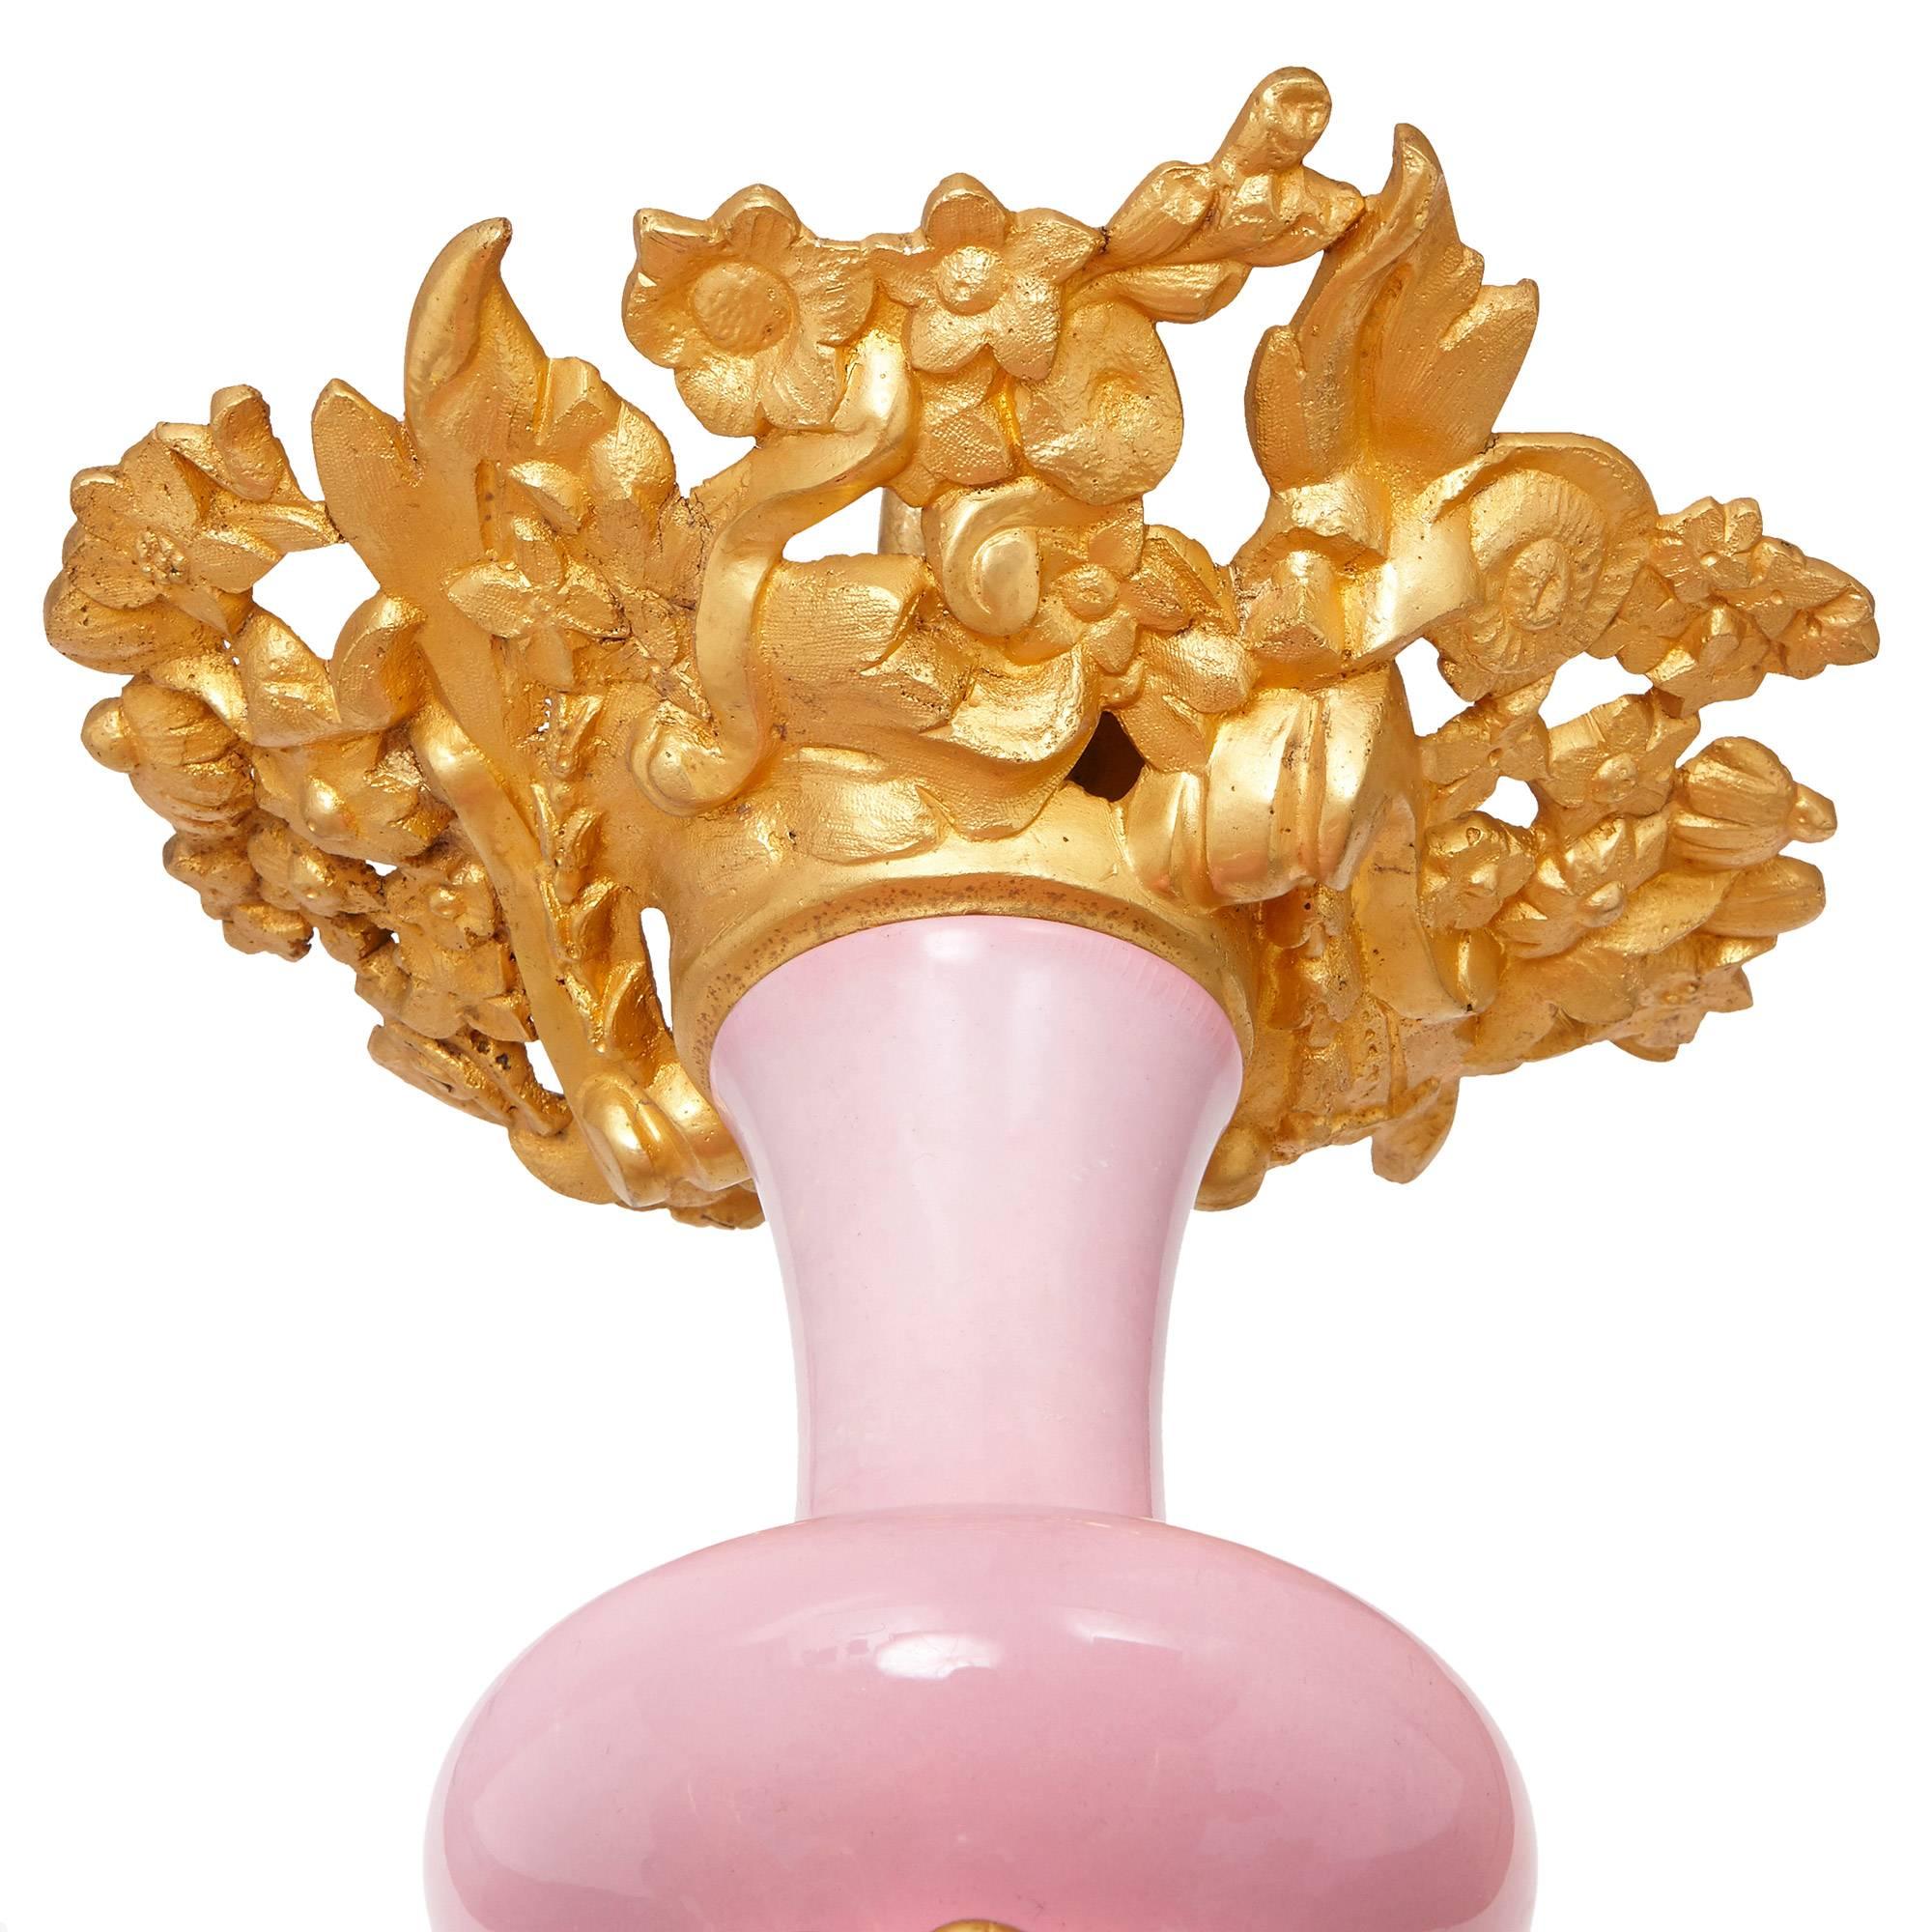 19th Century Belle Époque Style French Ormolu and Pink Porcelain Twelve-Light Chandelier For Sale